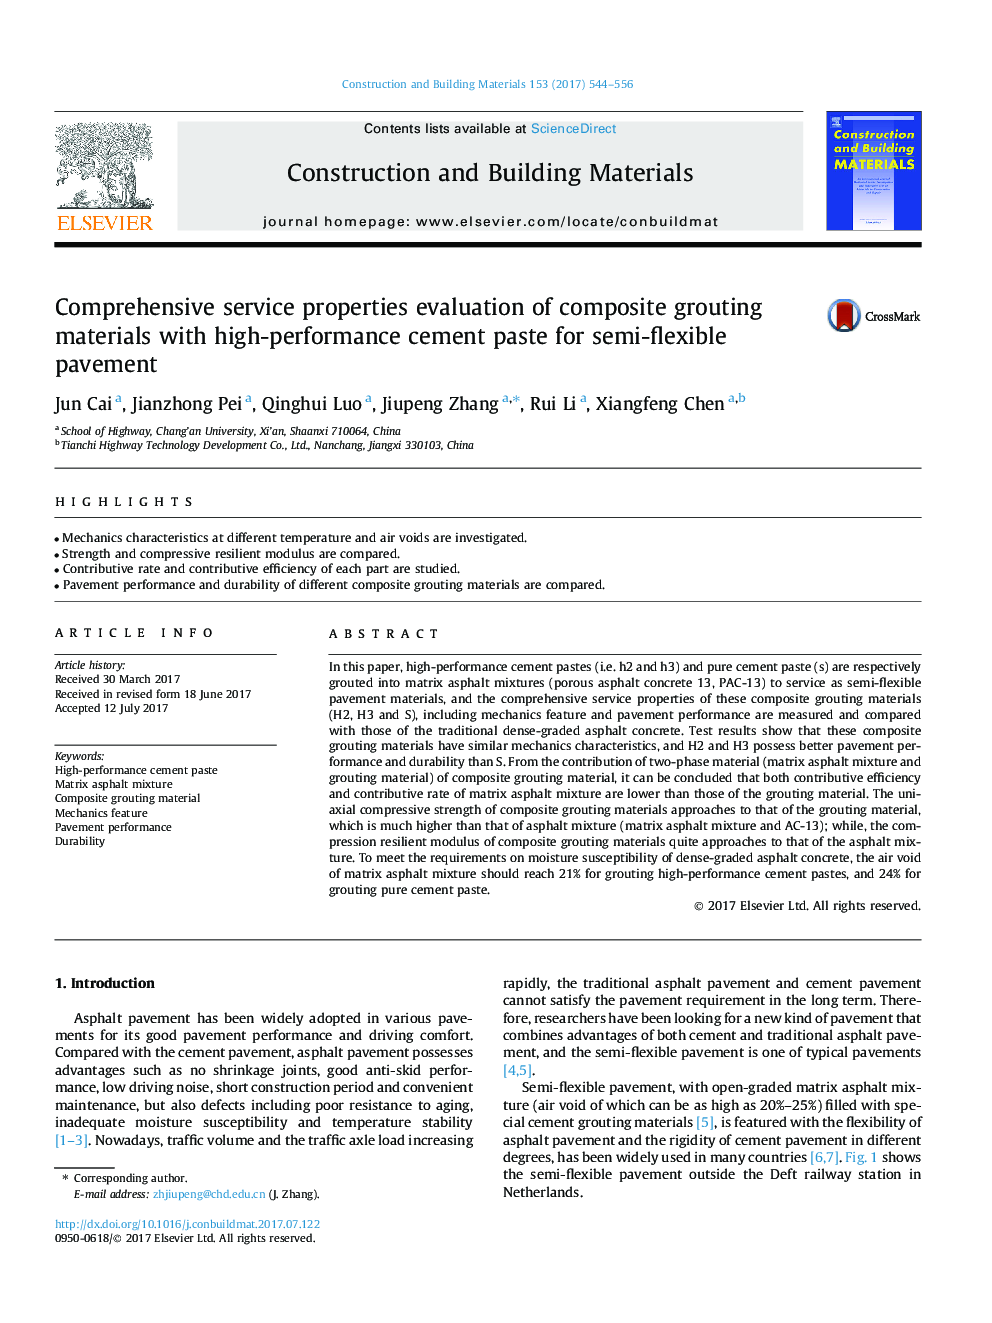 Comprehensive service properties evaluation of composite grouting materials with high-performance cement paste for semi-flexible pavement